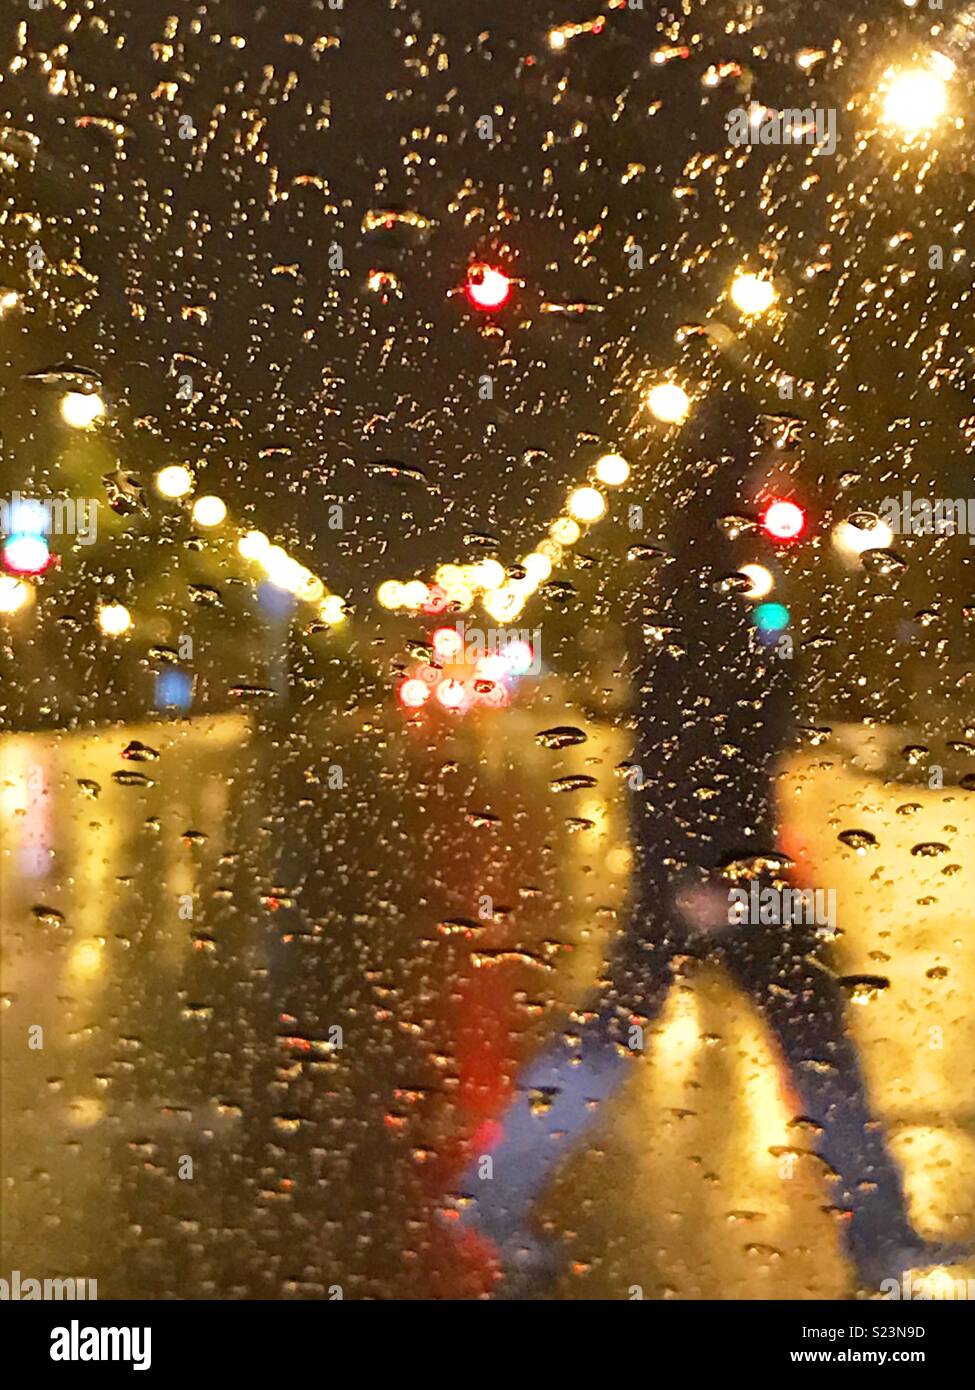 View through  a wet window in a rainy night. Stock Photo